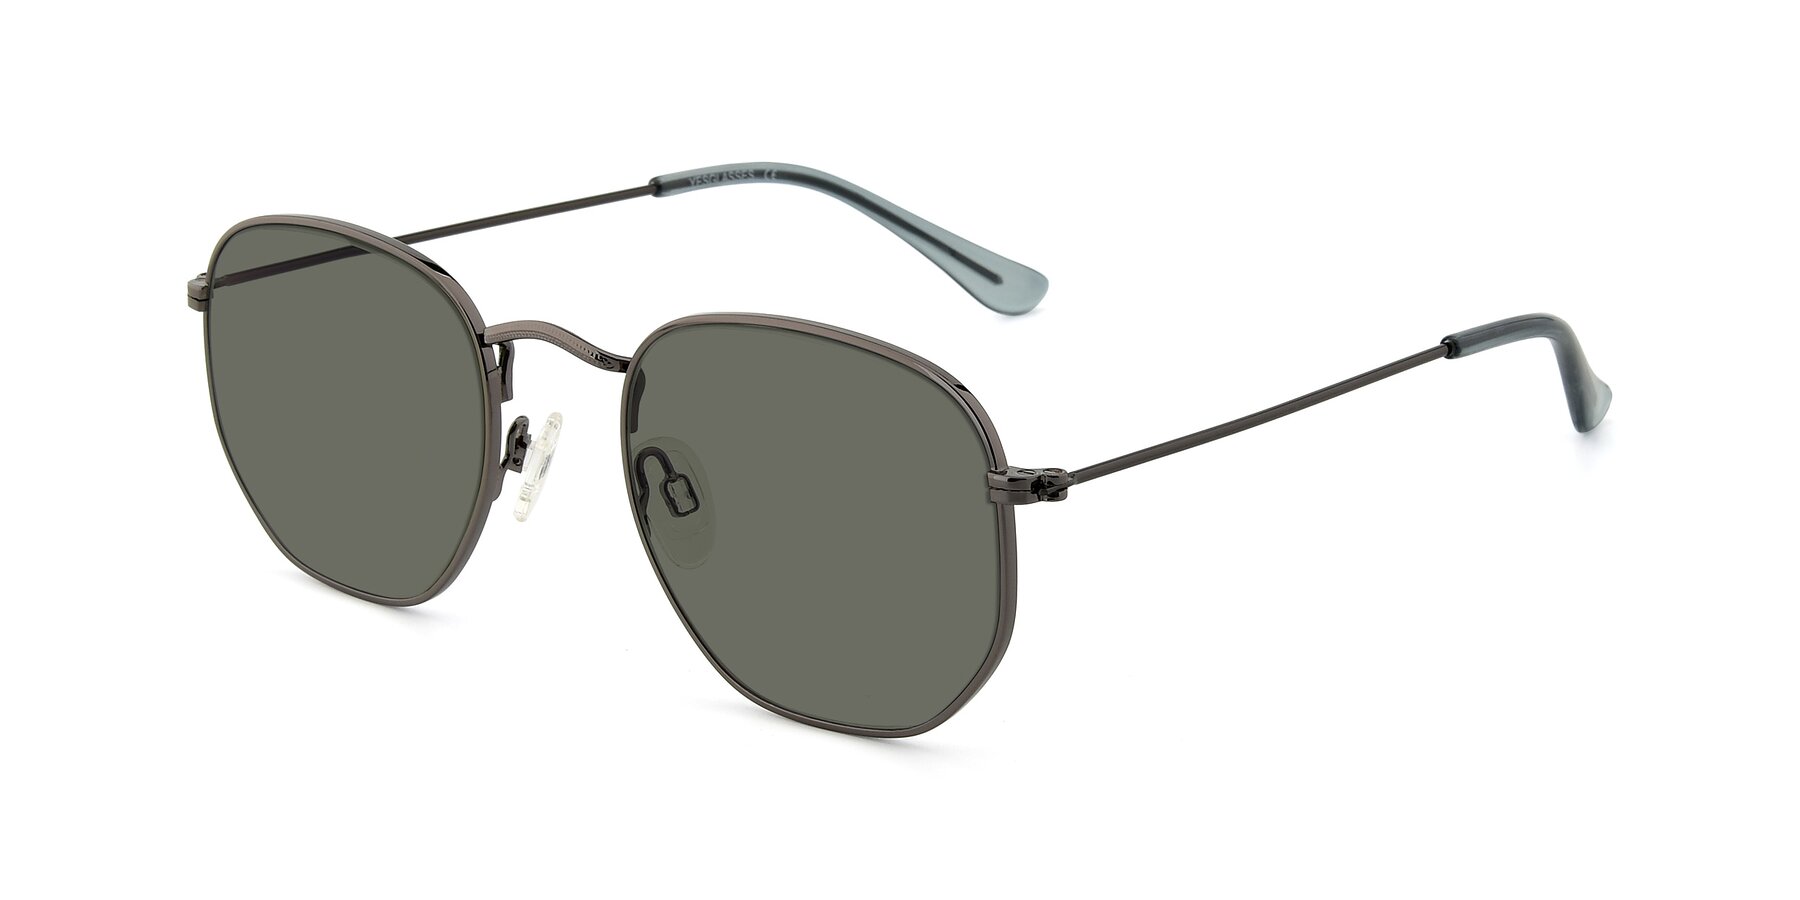 Angle of SSR1943 in Grey with Gray Polarized Lenses